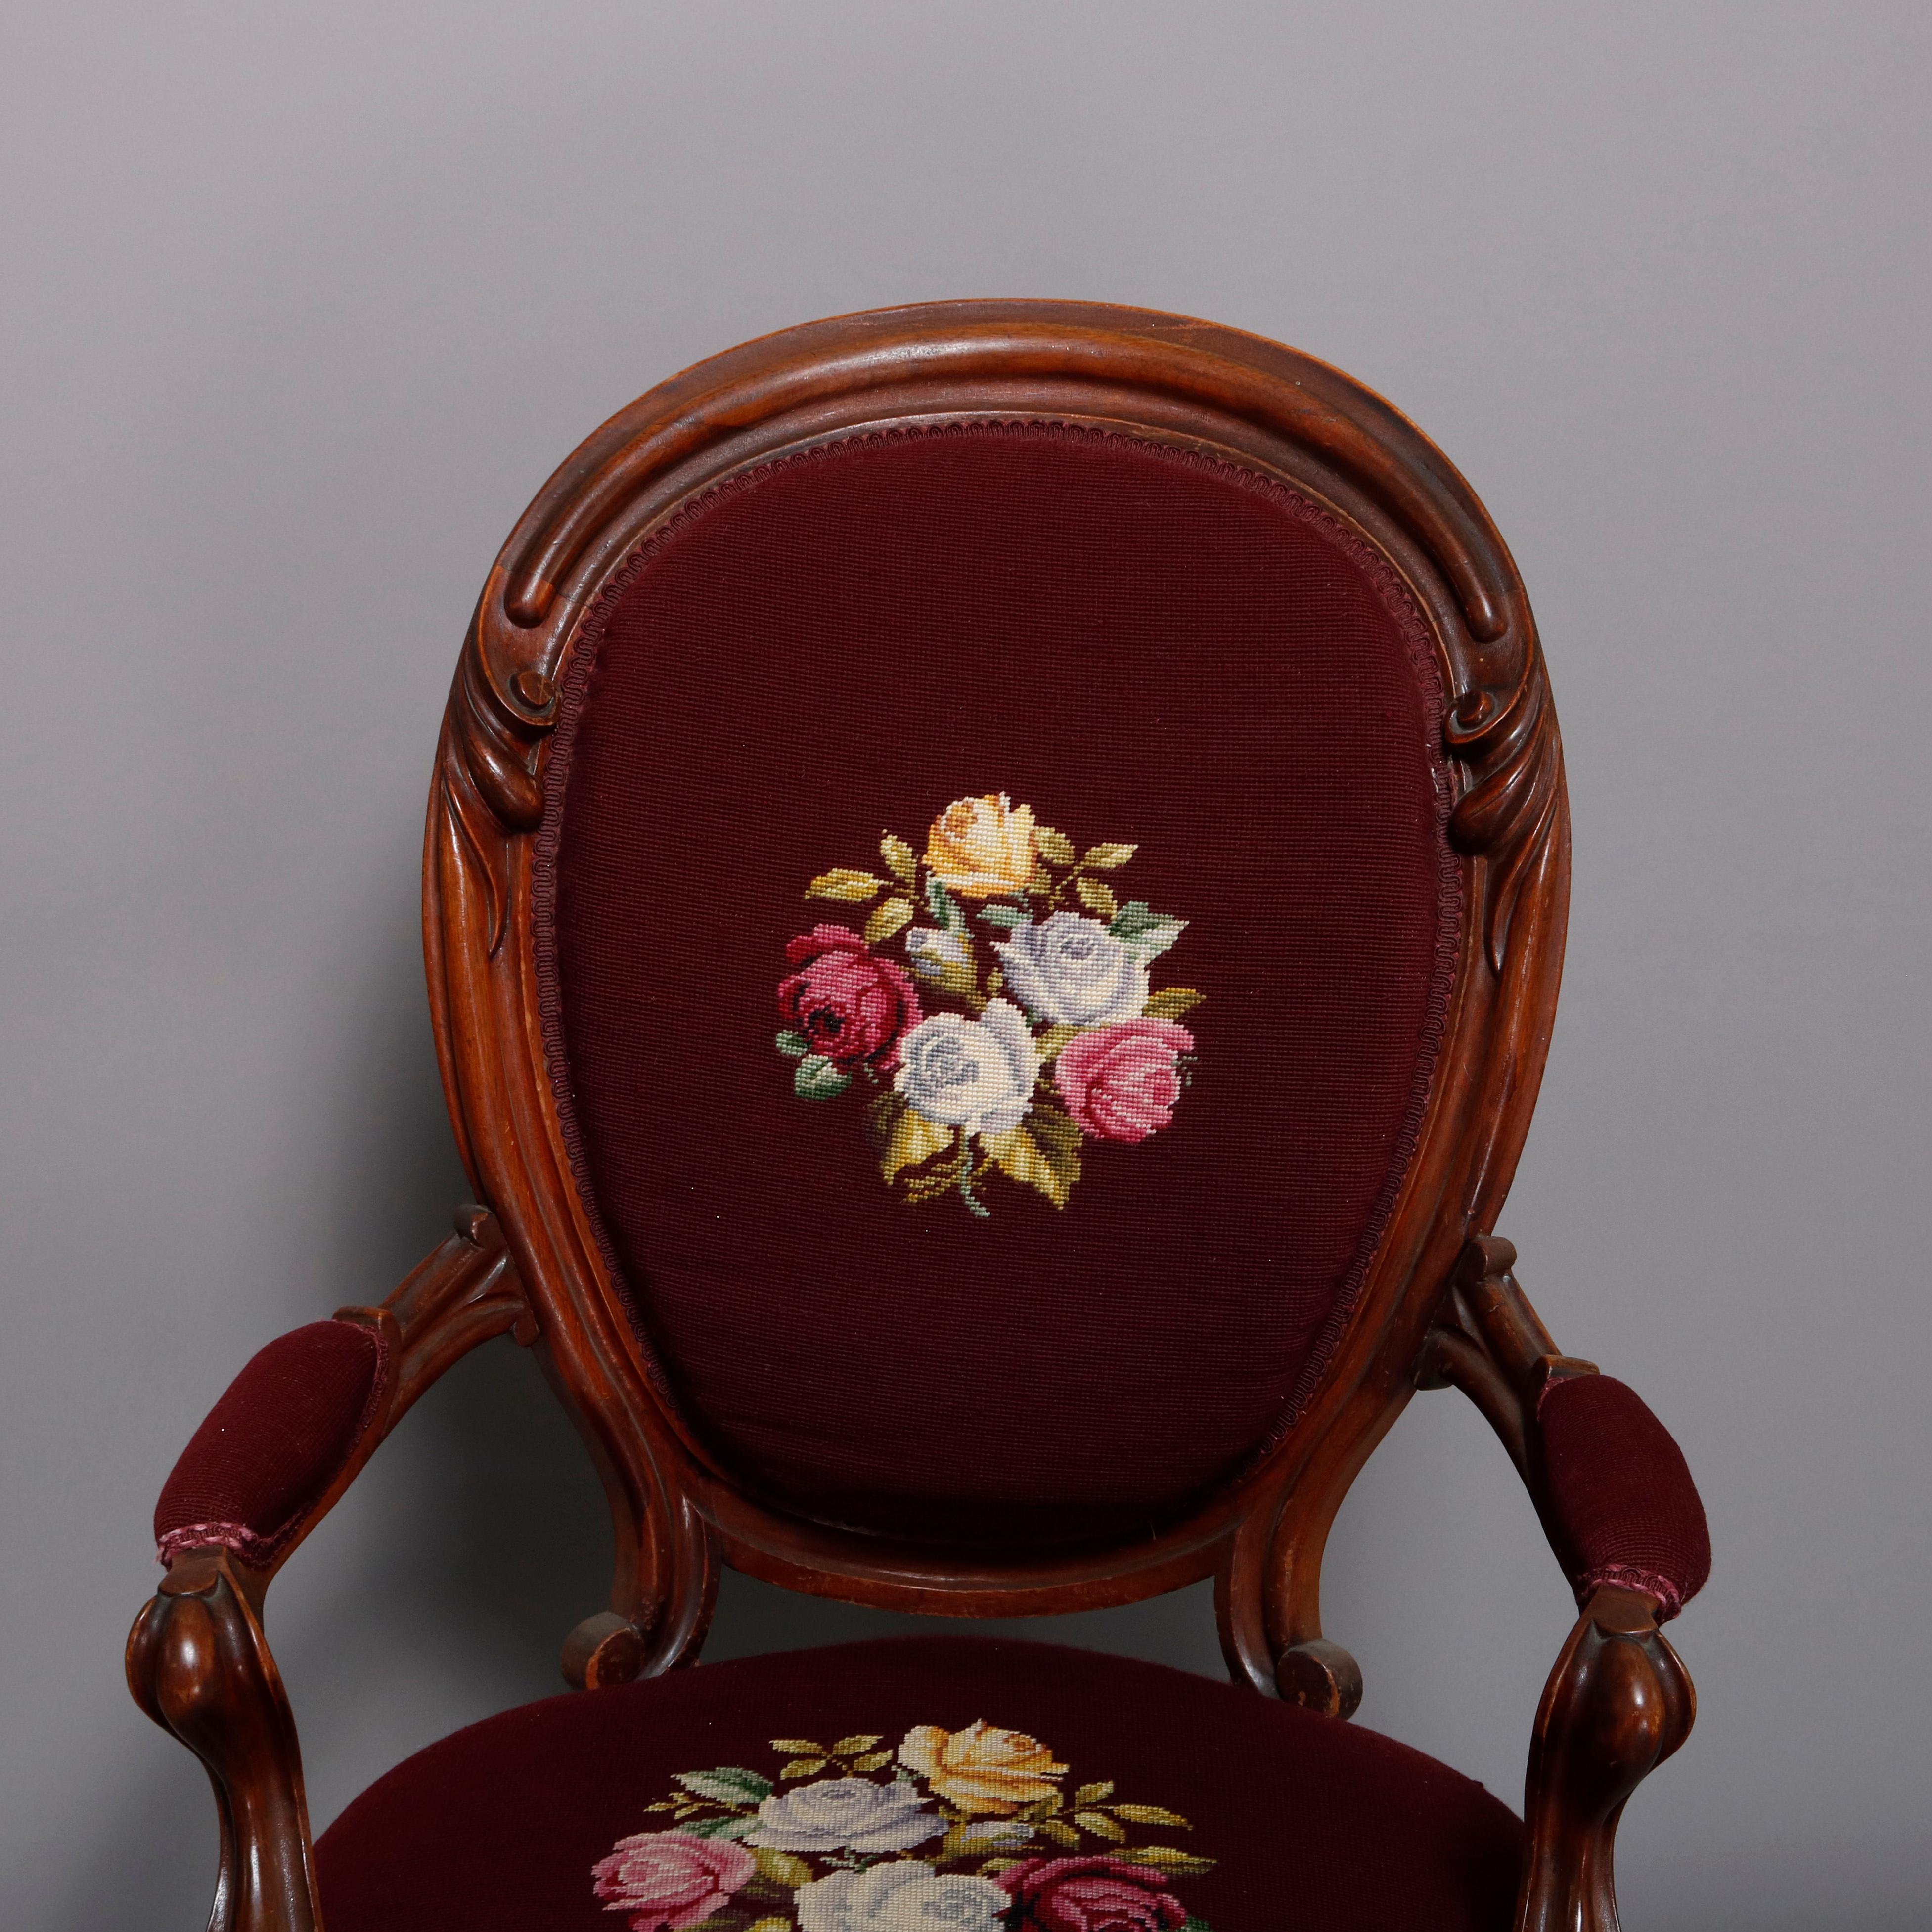 19th Century Antique Victorian Carved Walnut and Needlepoint Parlor Armchair, circa 1890